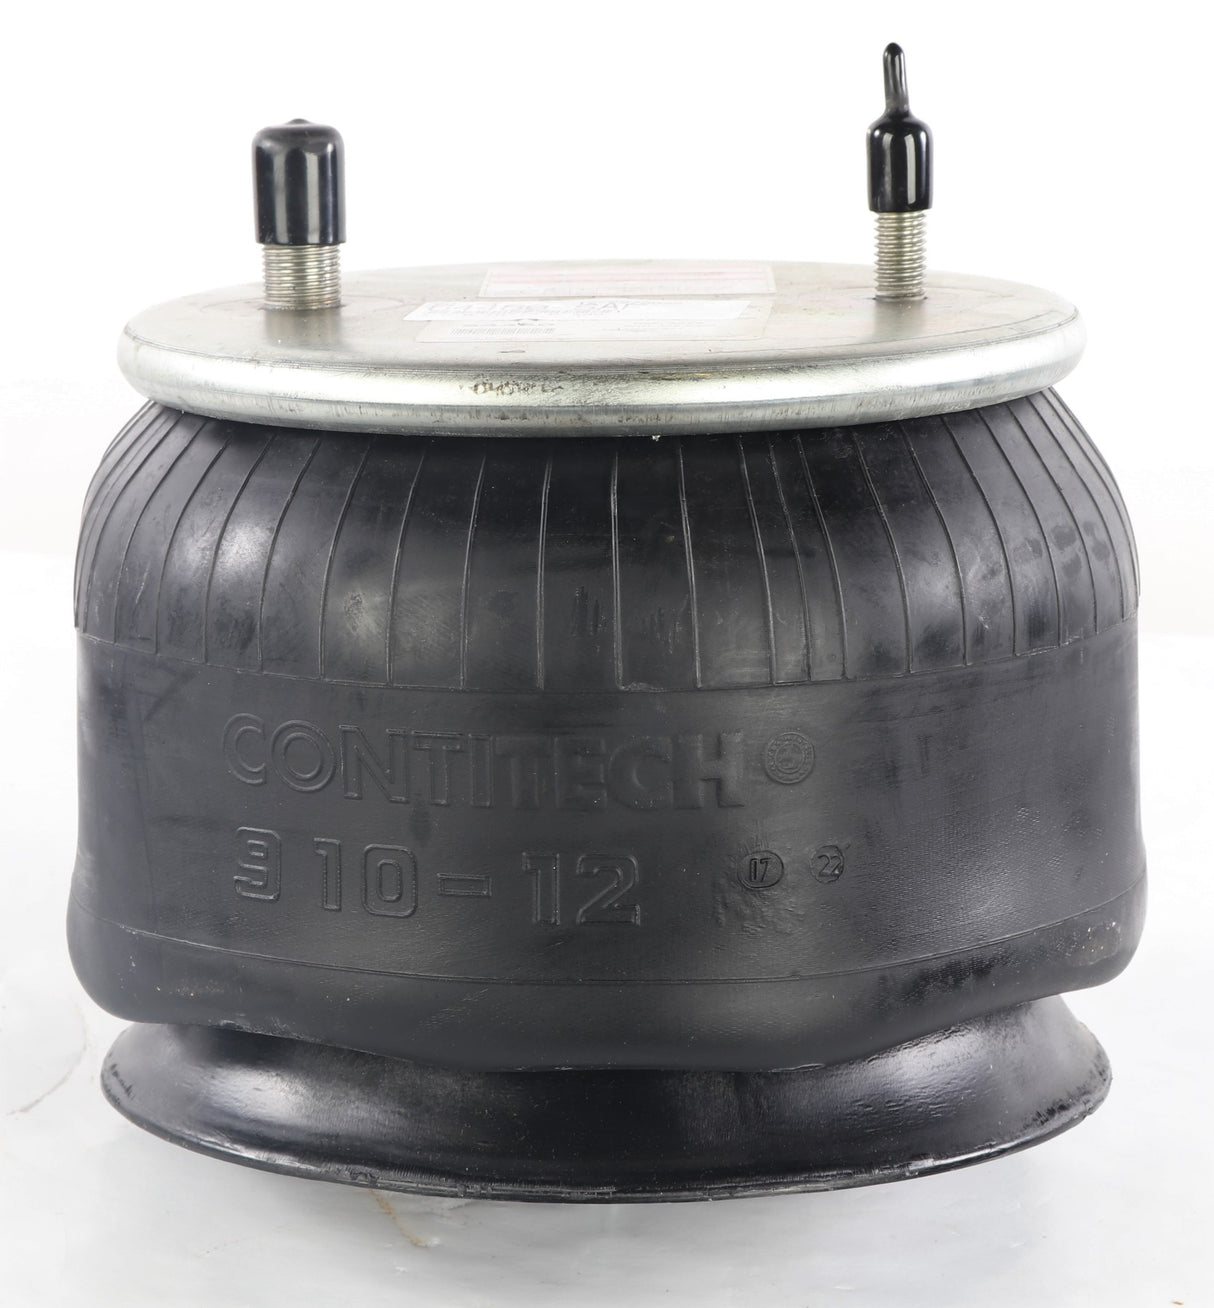 CONTINENTAL AG - CONTITECH/ELITE/GOODYEAR/ROULUNDS ­-­ 64460 ­-­ 9 10-12 P 495 AIR SPRING